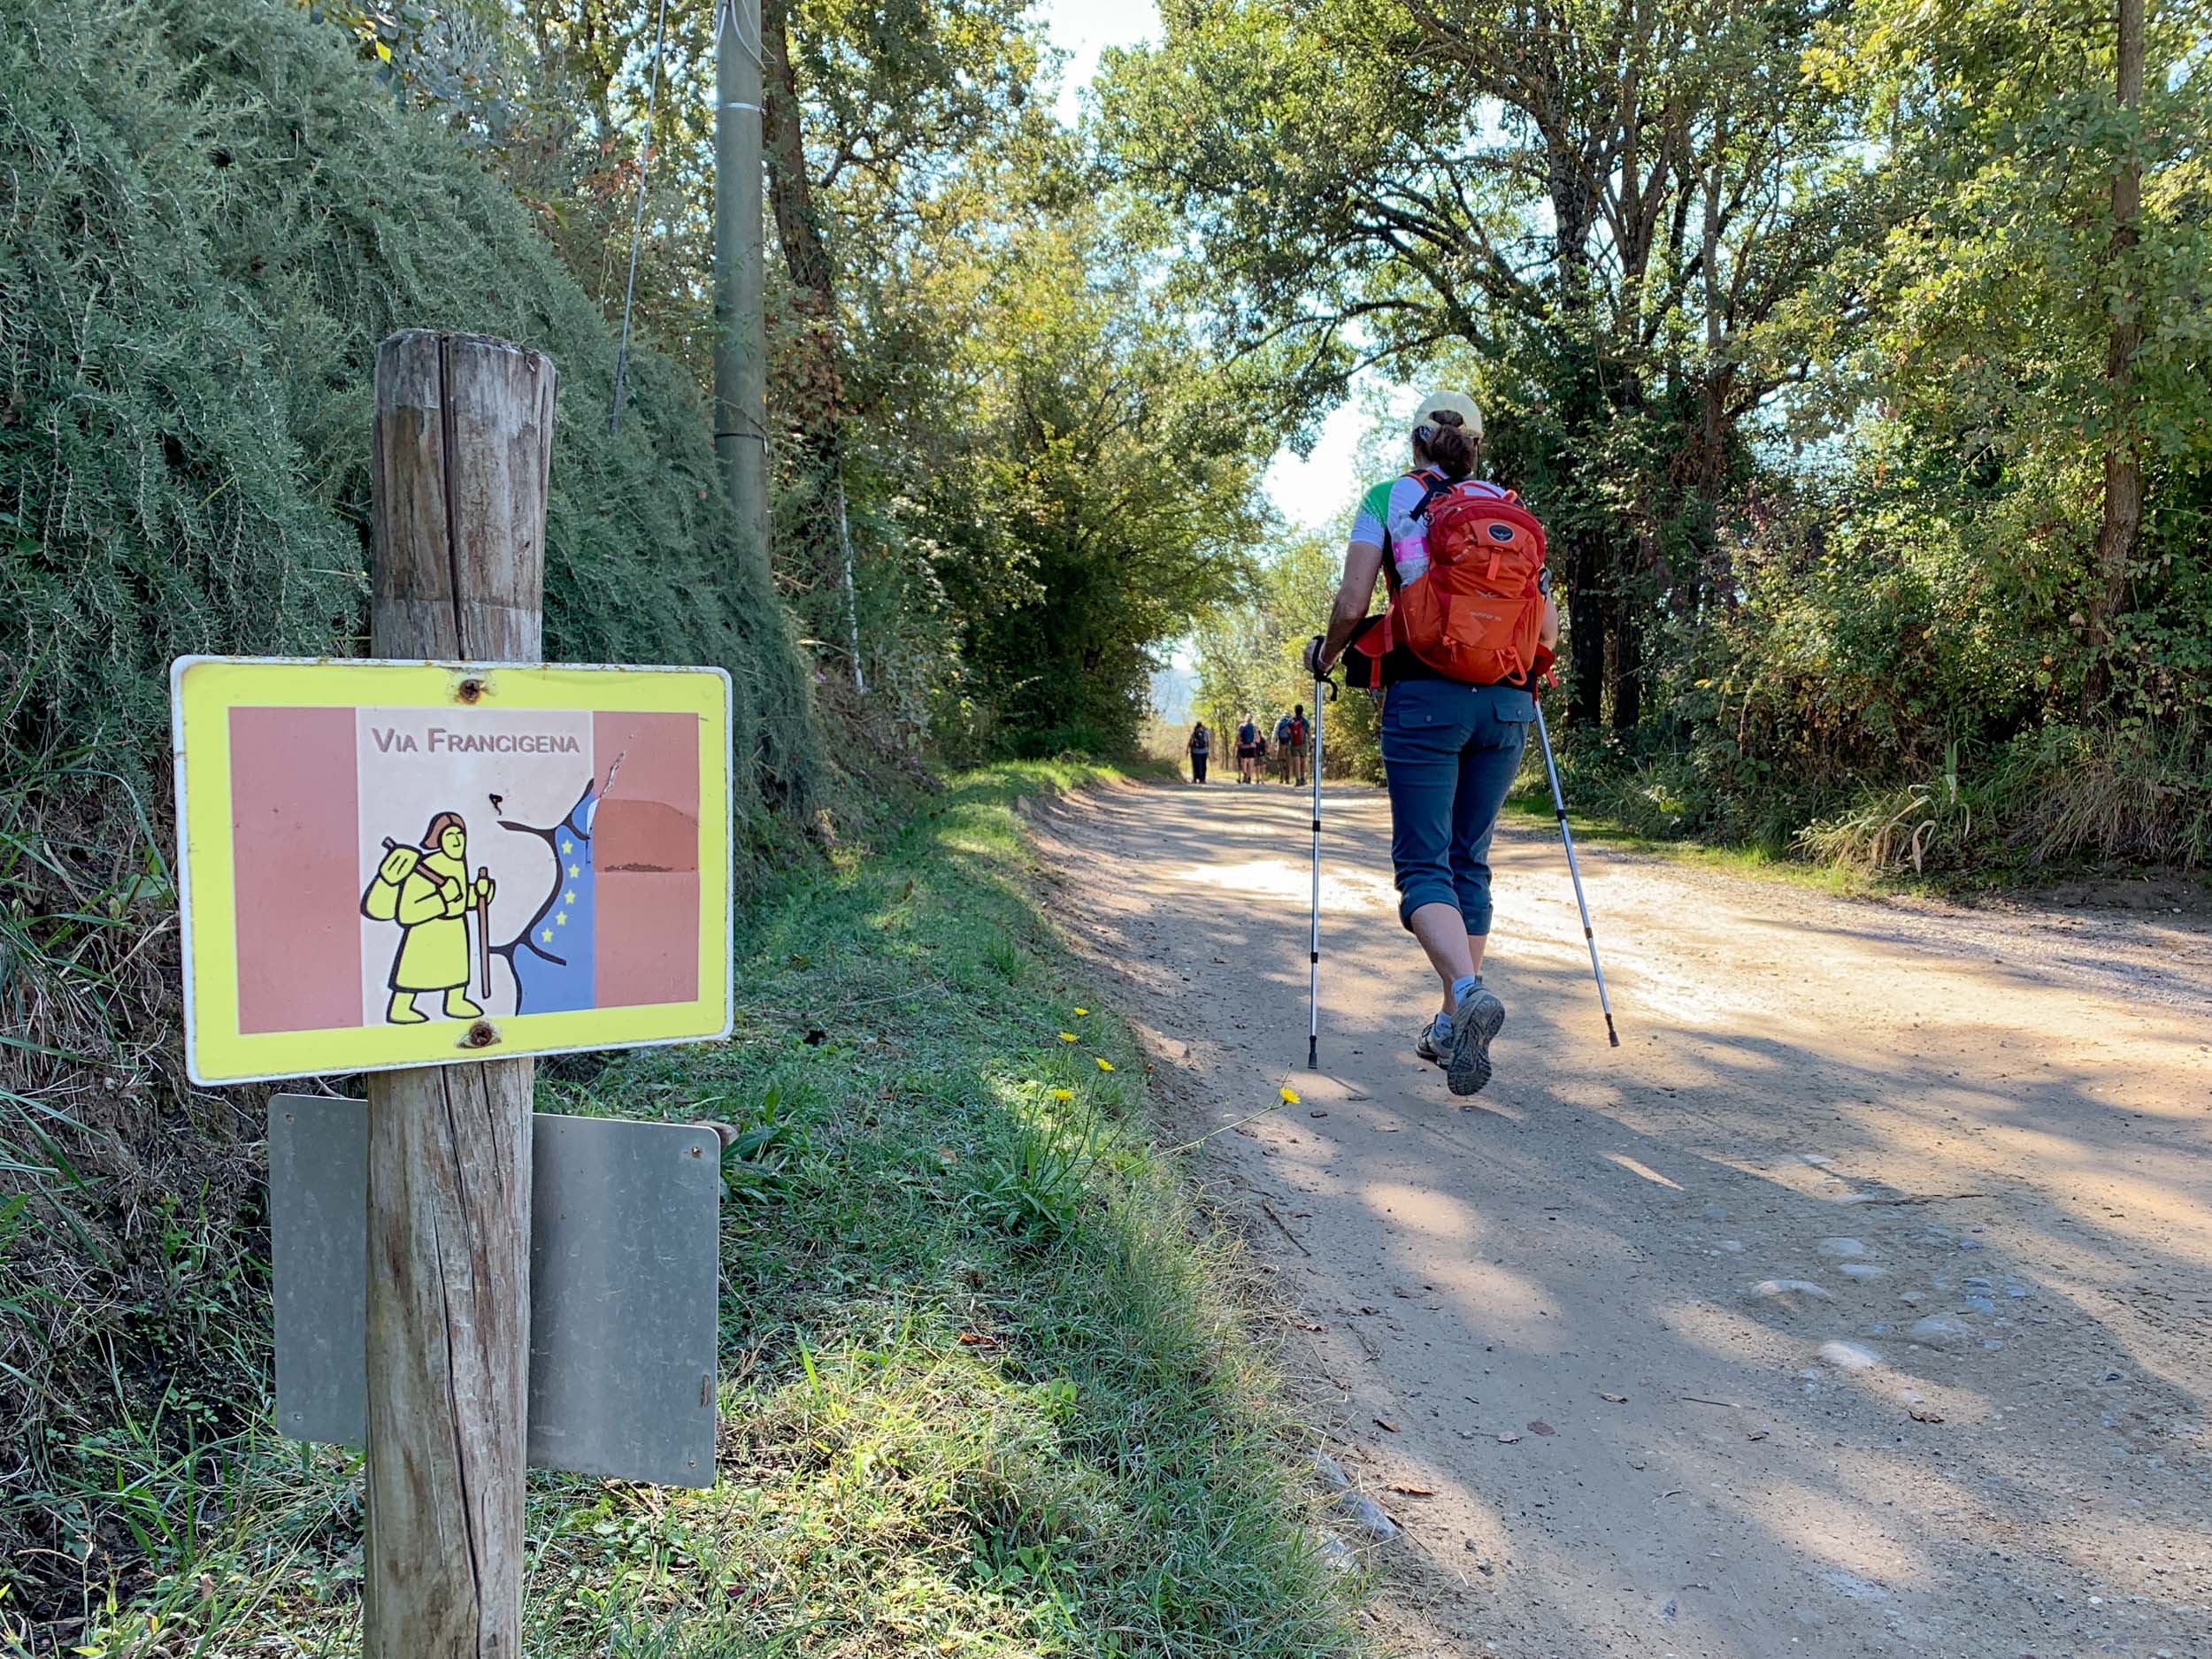 The Via Francigena is well-marked in Tuscany